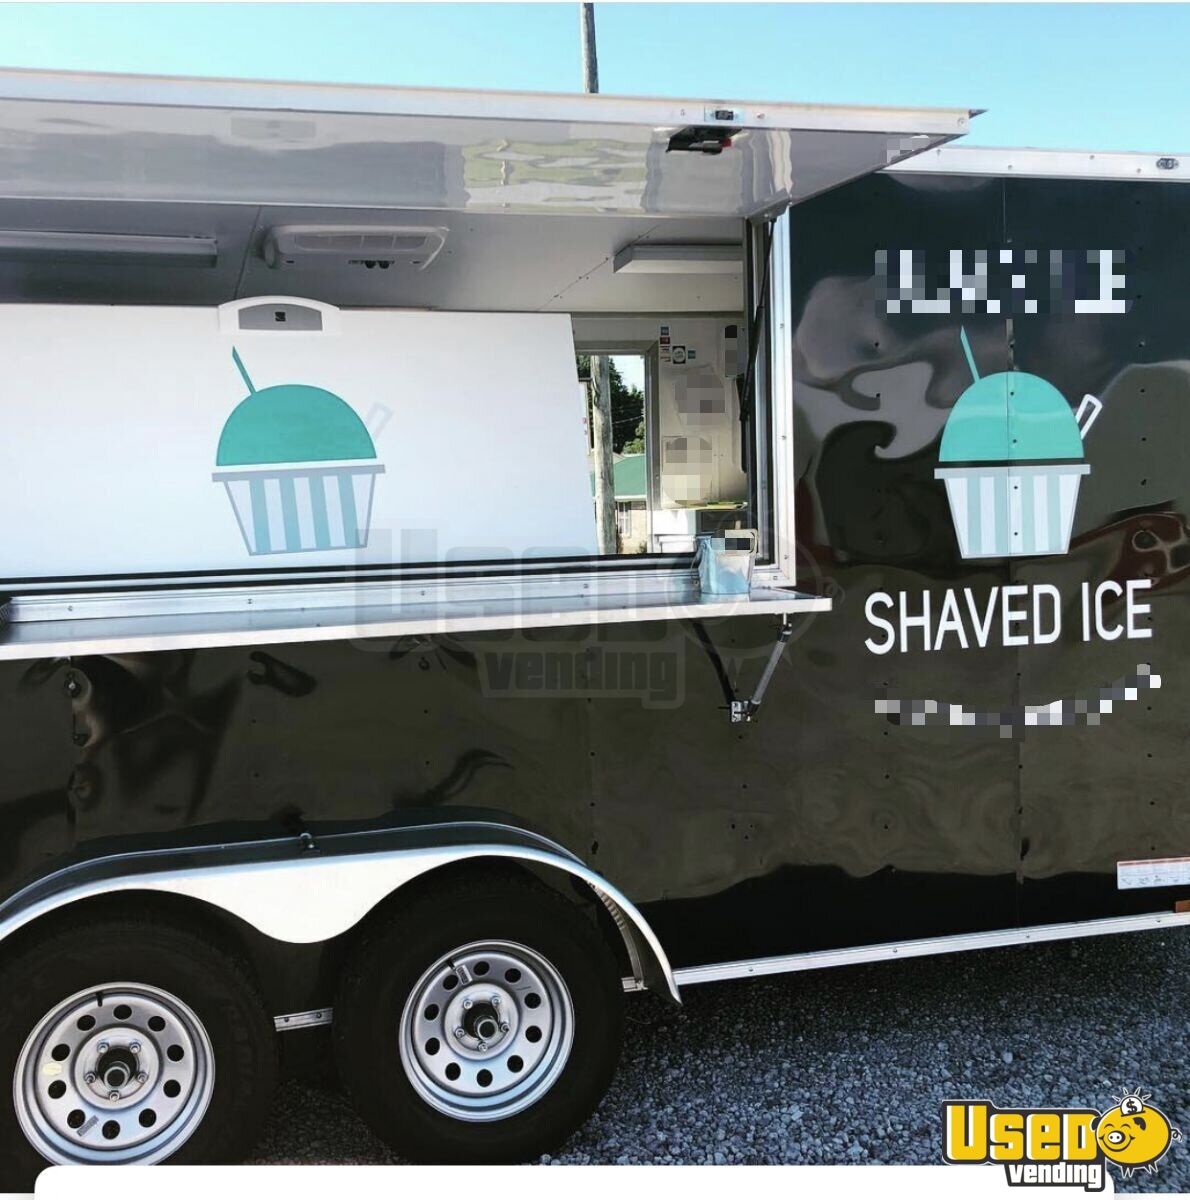 sale Shaved for ice businesses